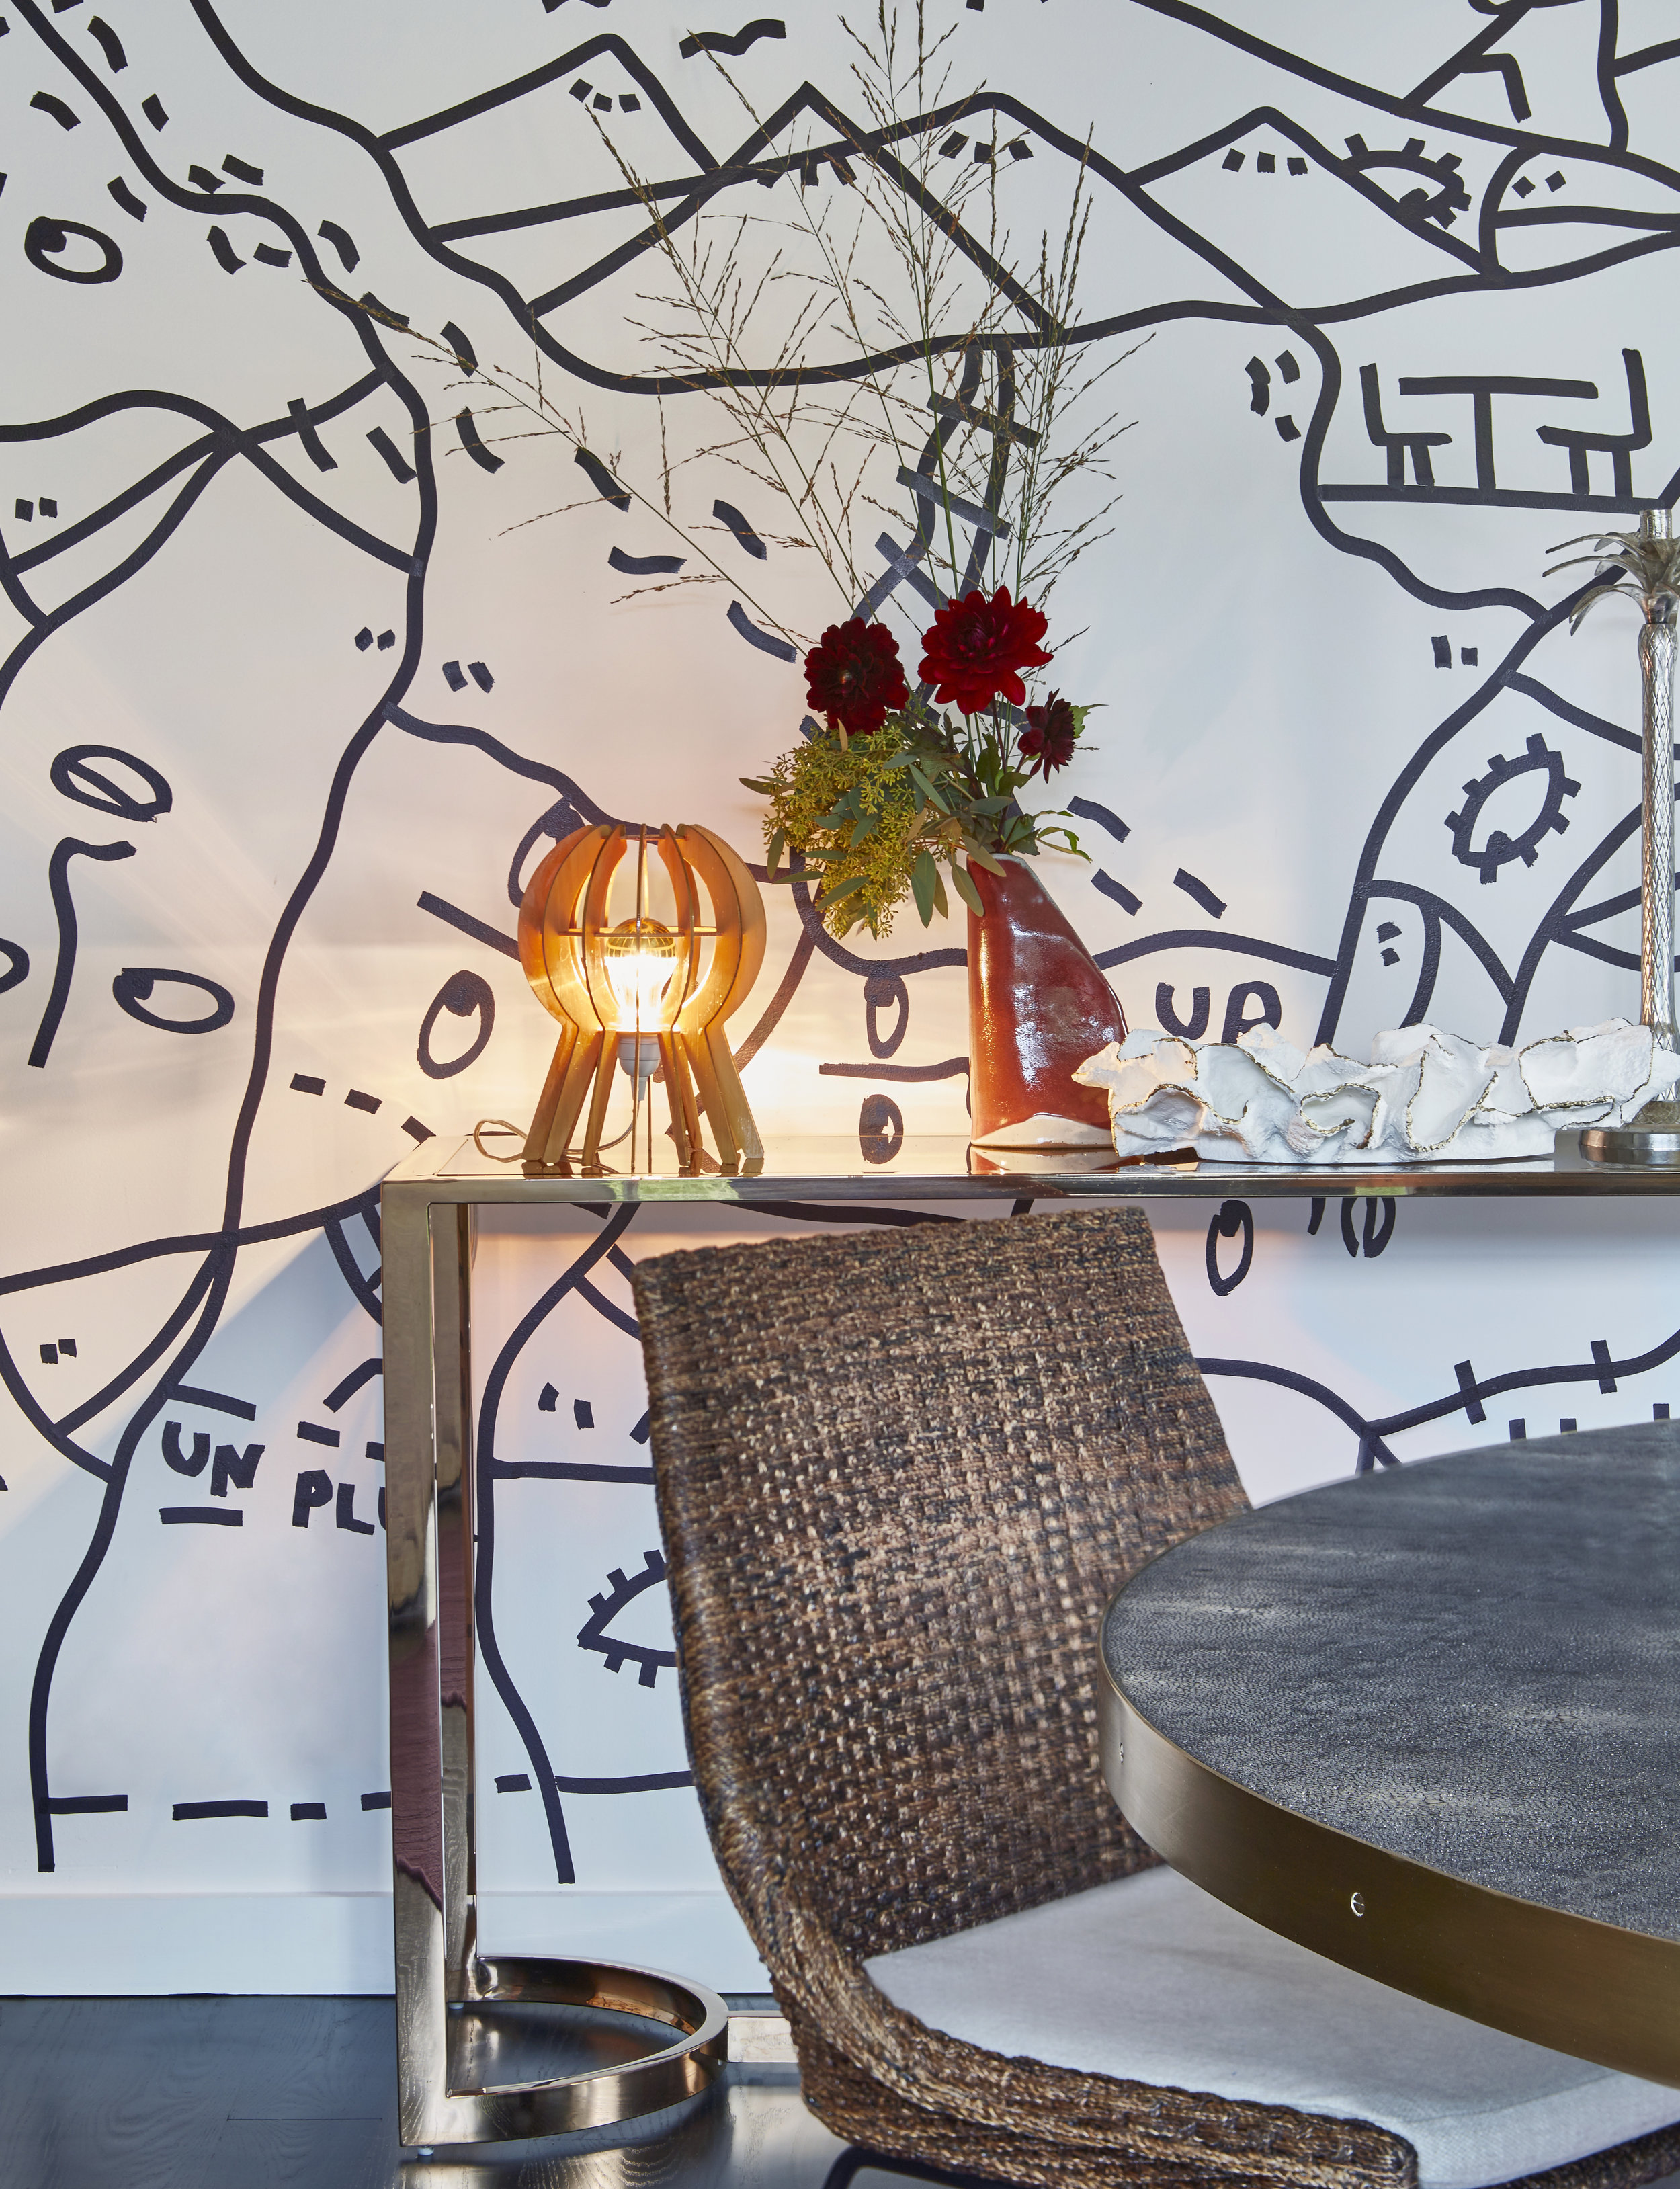 Custom wall painting/mural by Shantell Martin. Tall chairs: Handwoven river reed chairs made in Thailand.